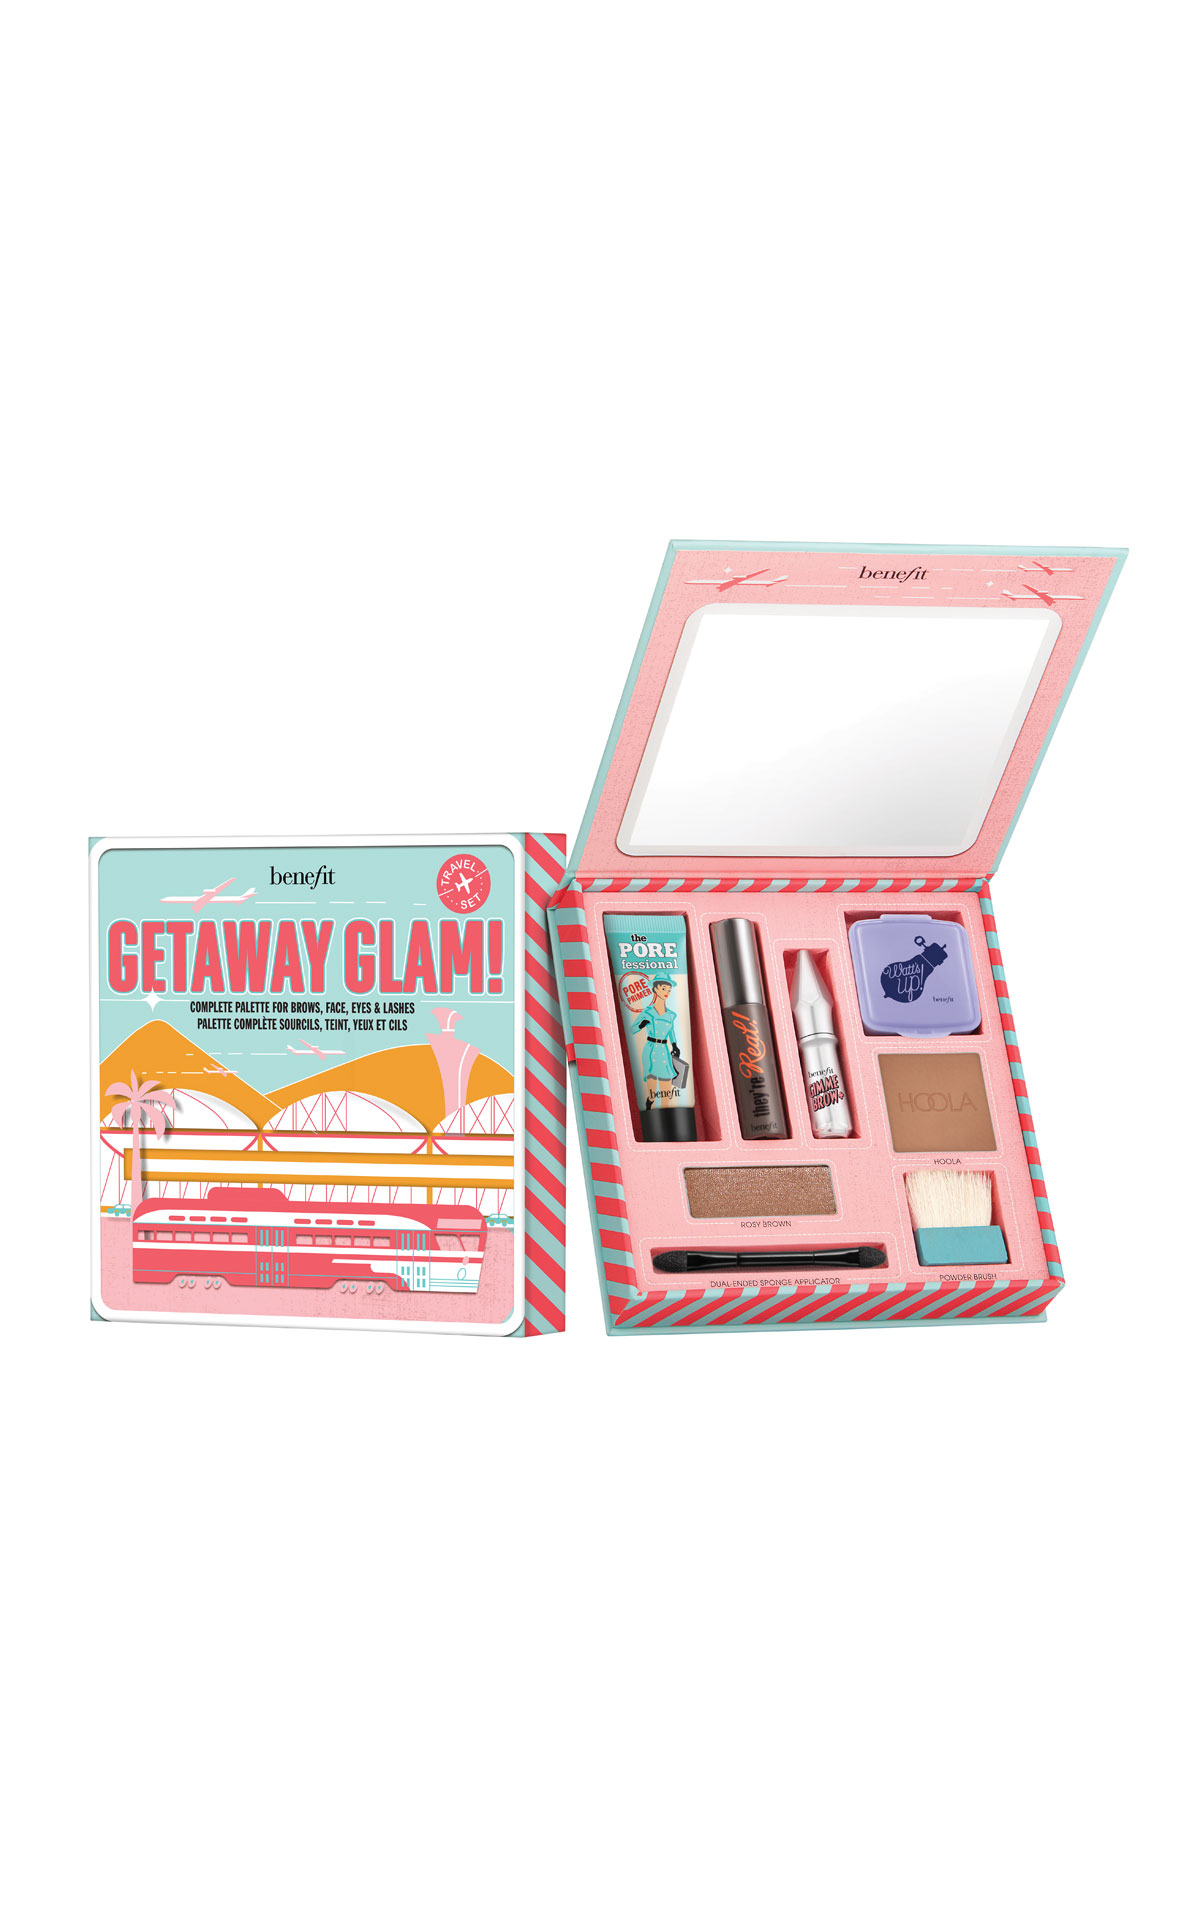 Benefit Gateway glam full face palette from Bicester Village